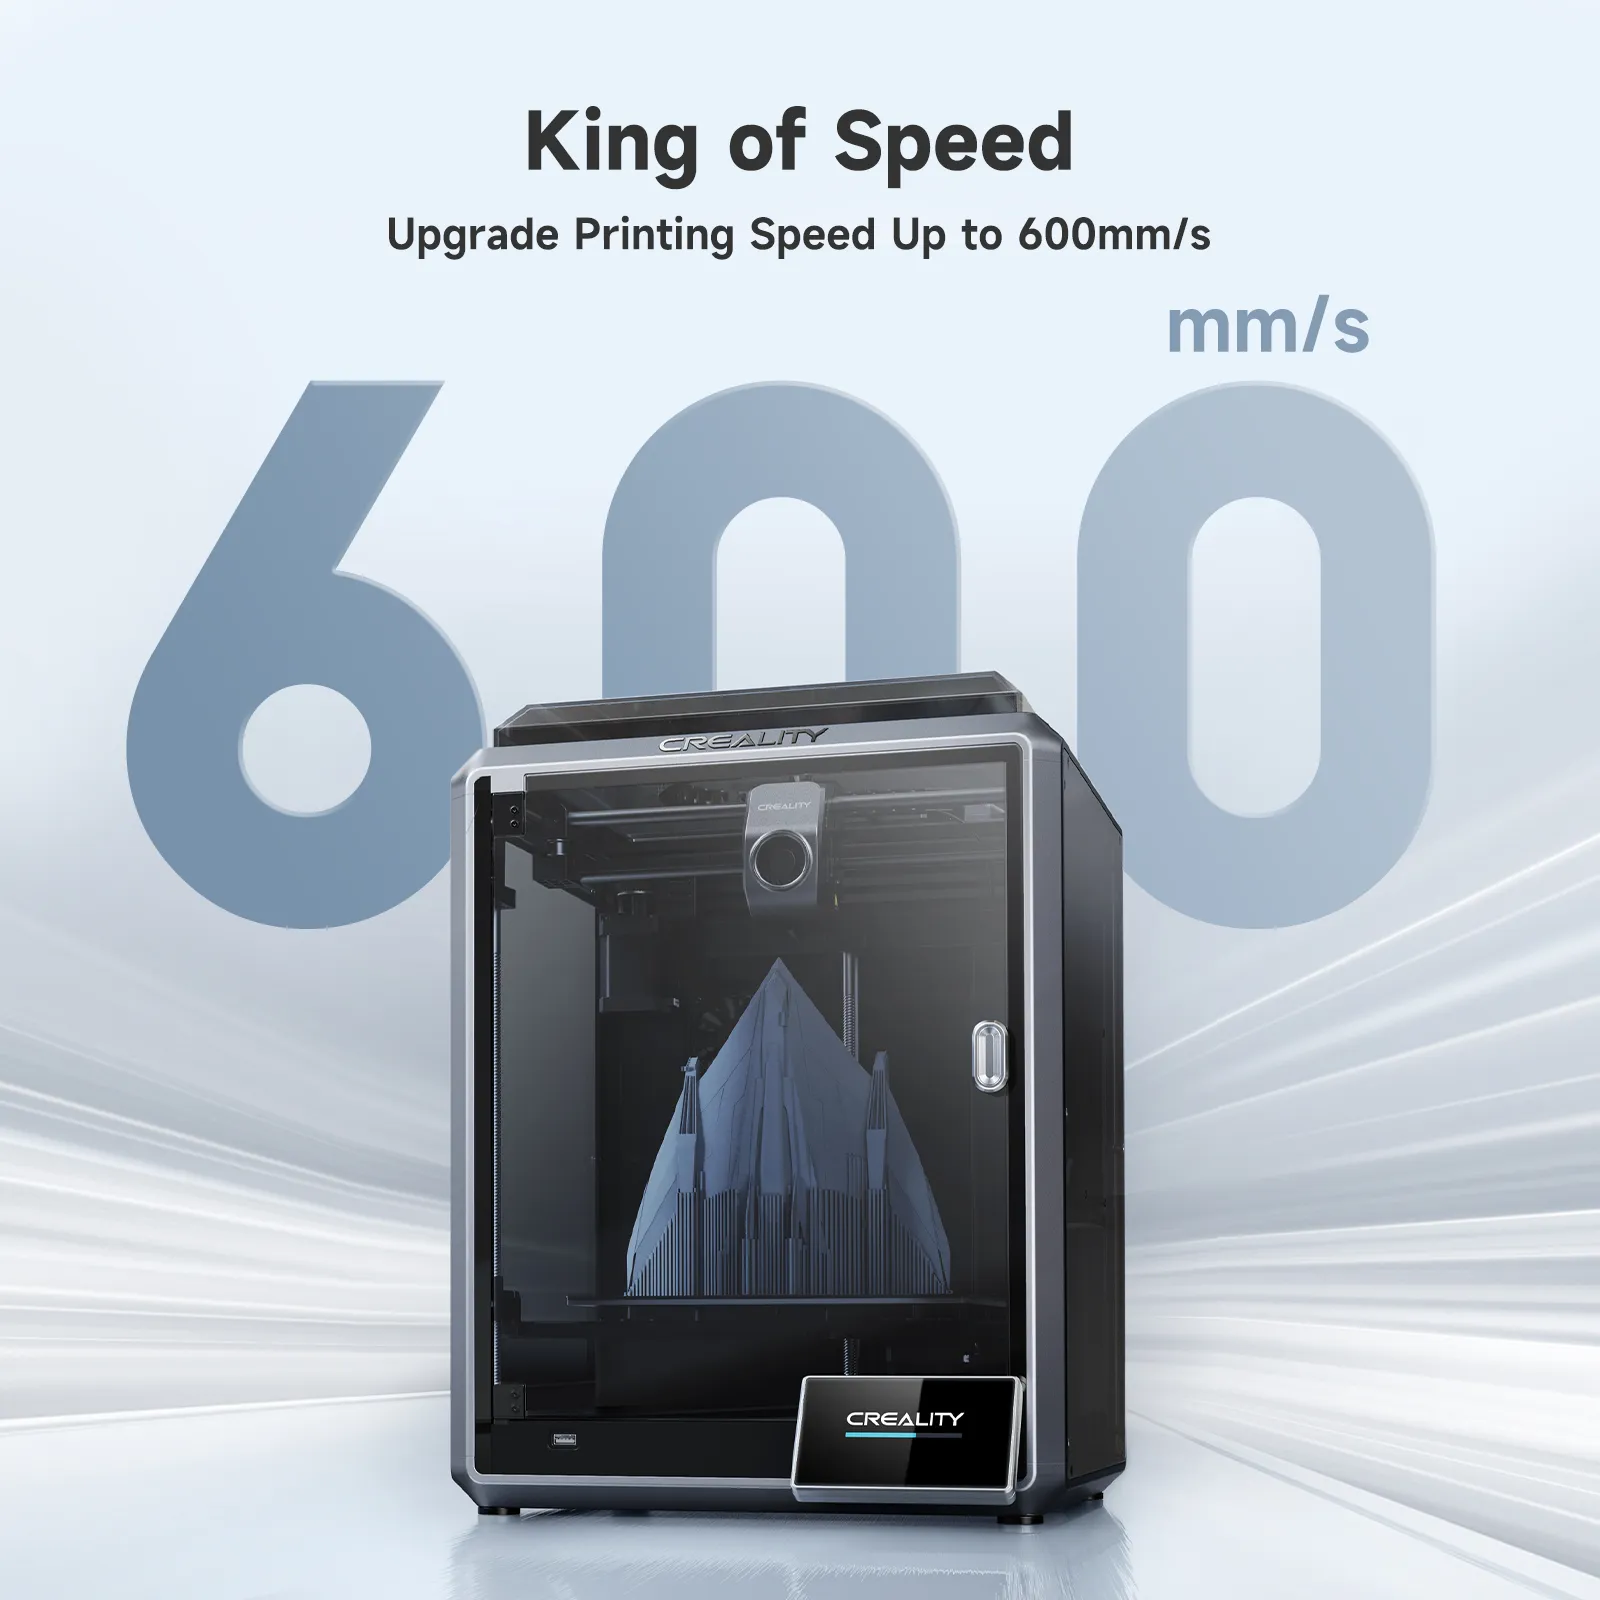 Can the Creality K1 print at 600 mm/s ONLY with Hyper PLA? 